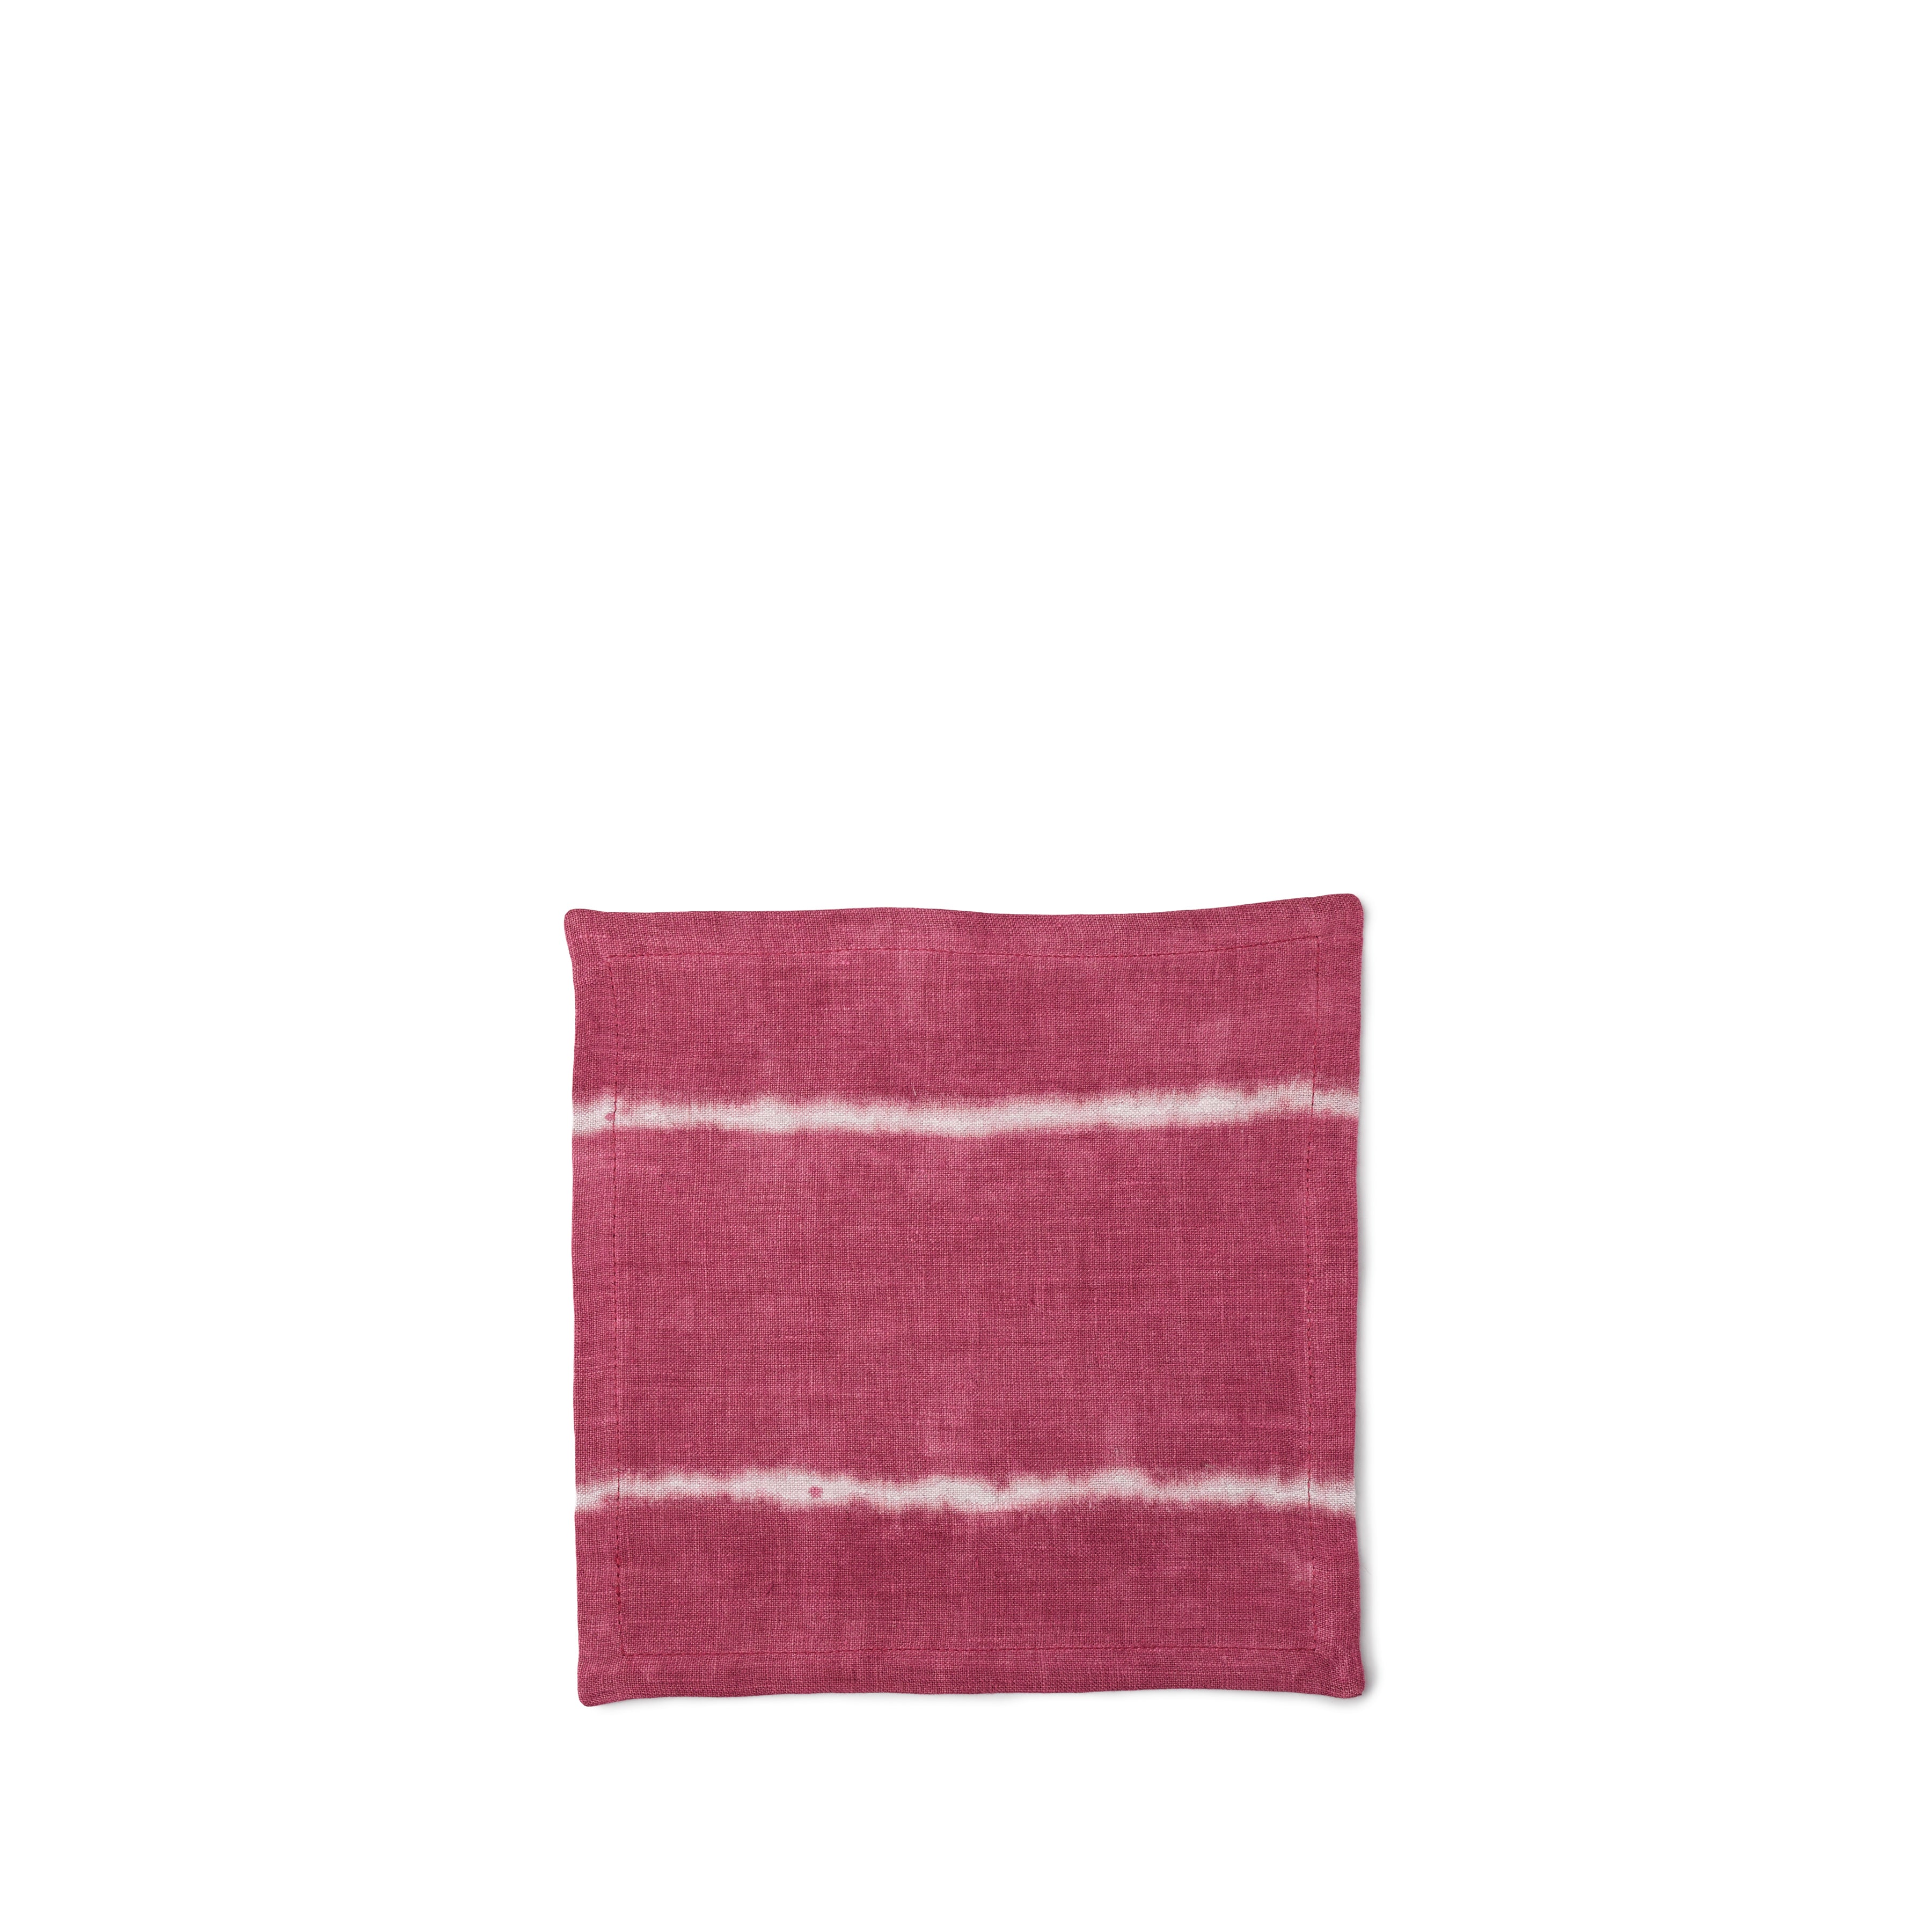 Stripes Cocktail Napkin in Cranberry Zoom Image 1